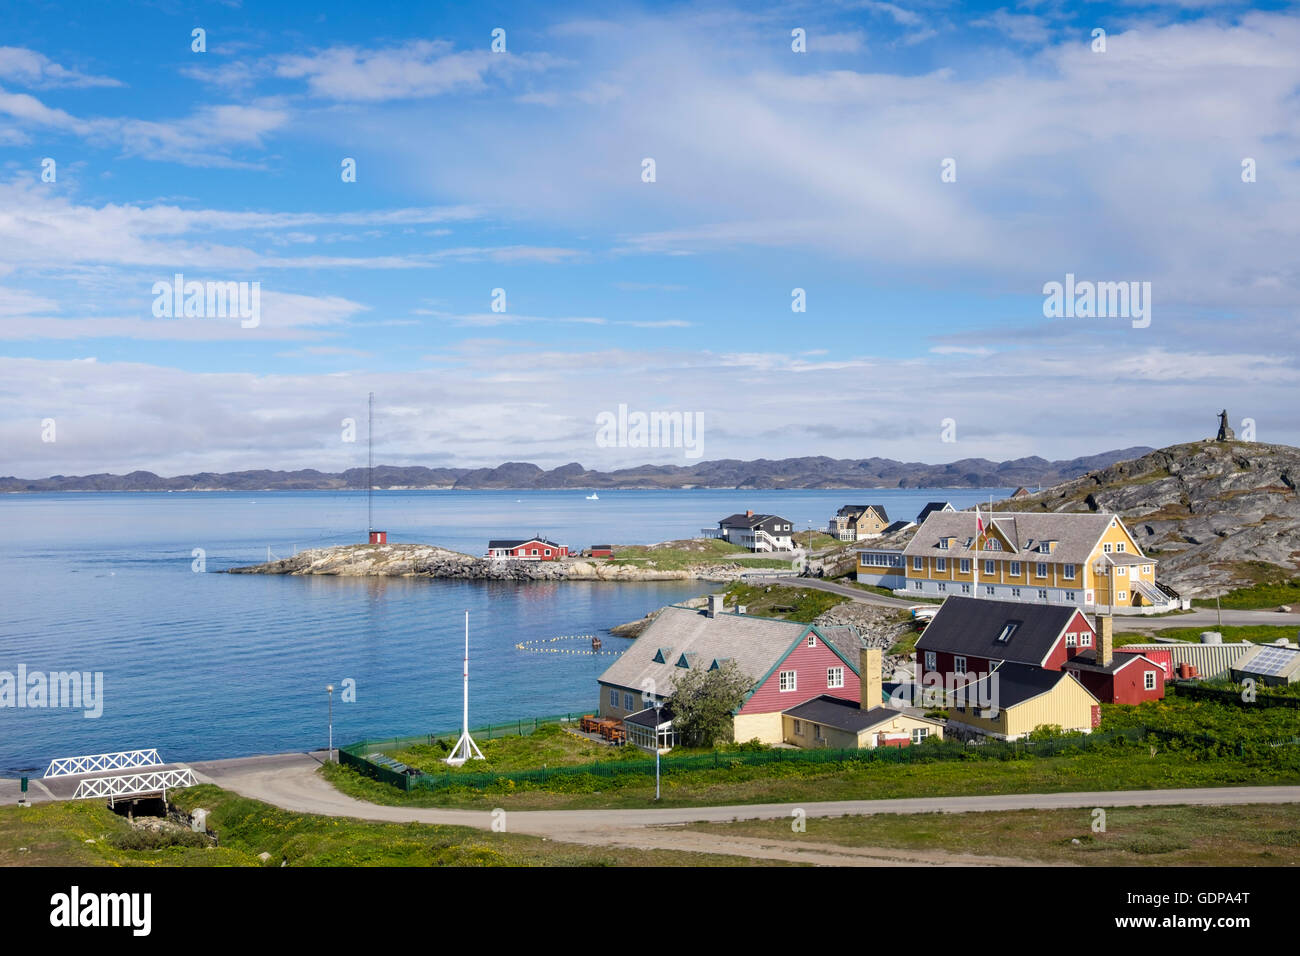 Overview of old town and harbour with Hans Egede House 1728 oldest in country and venue for official government receptions. Nuuk Greenland Stock Photo